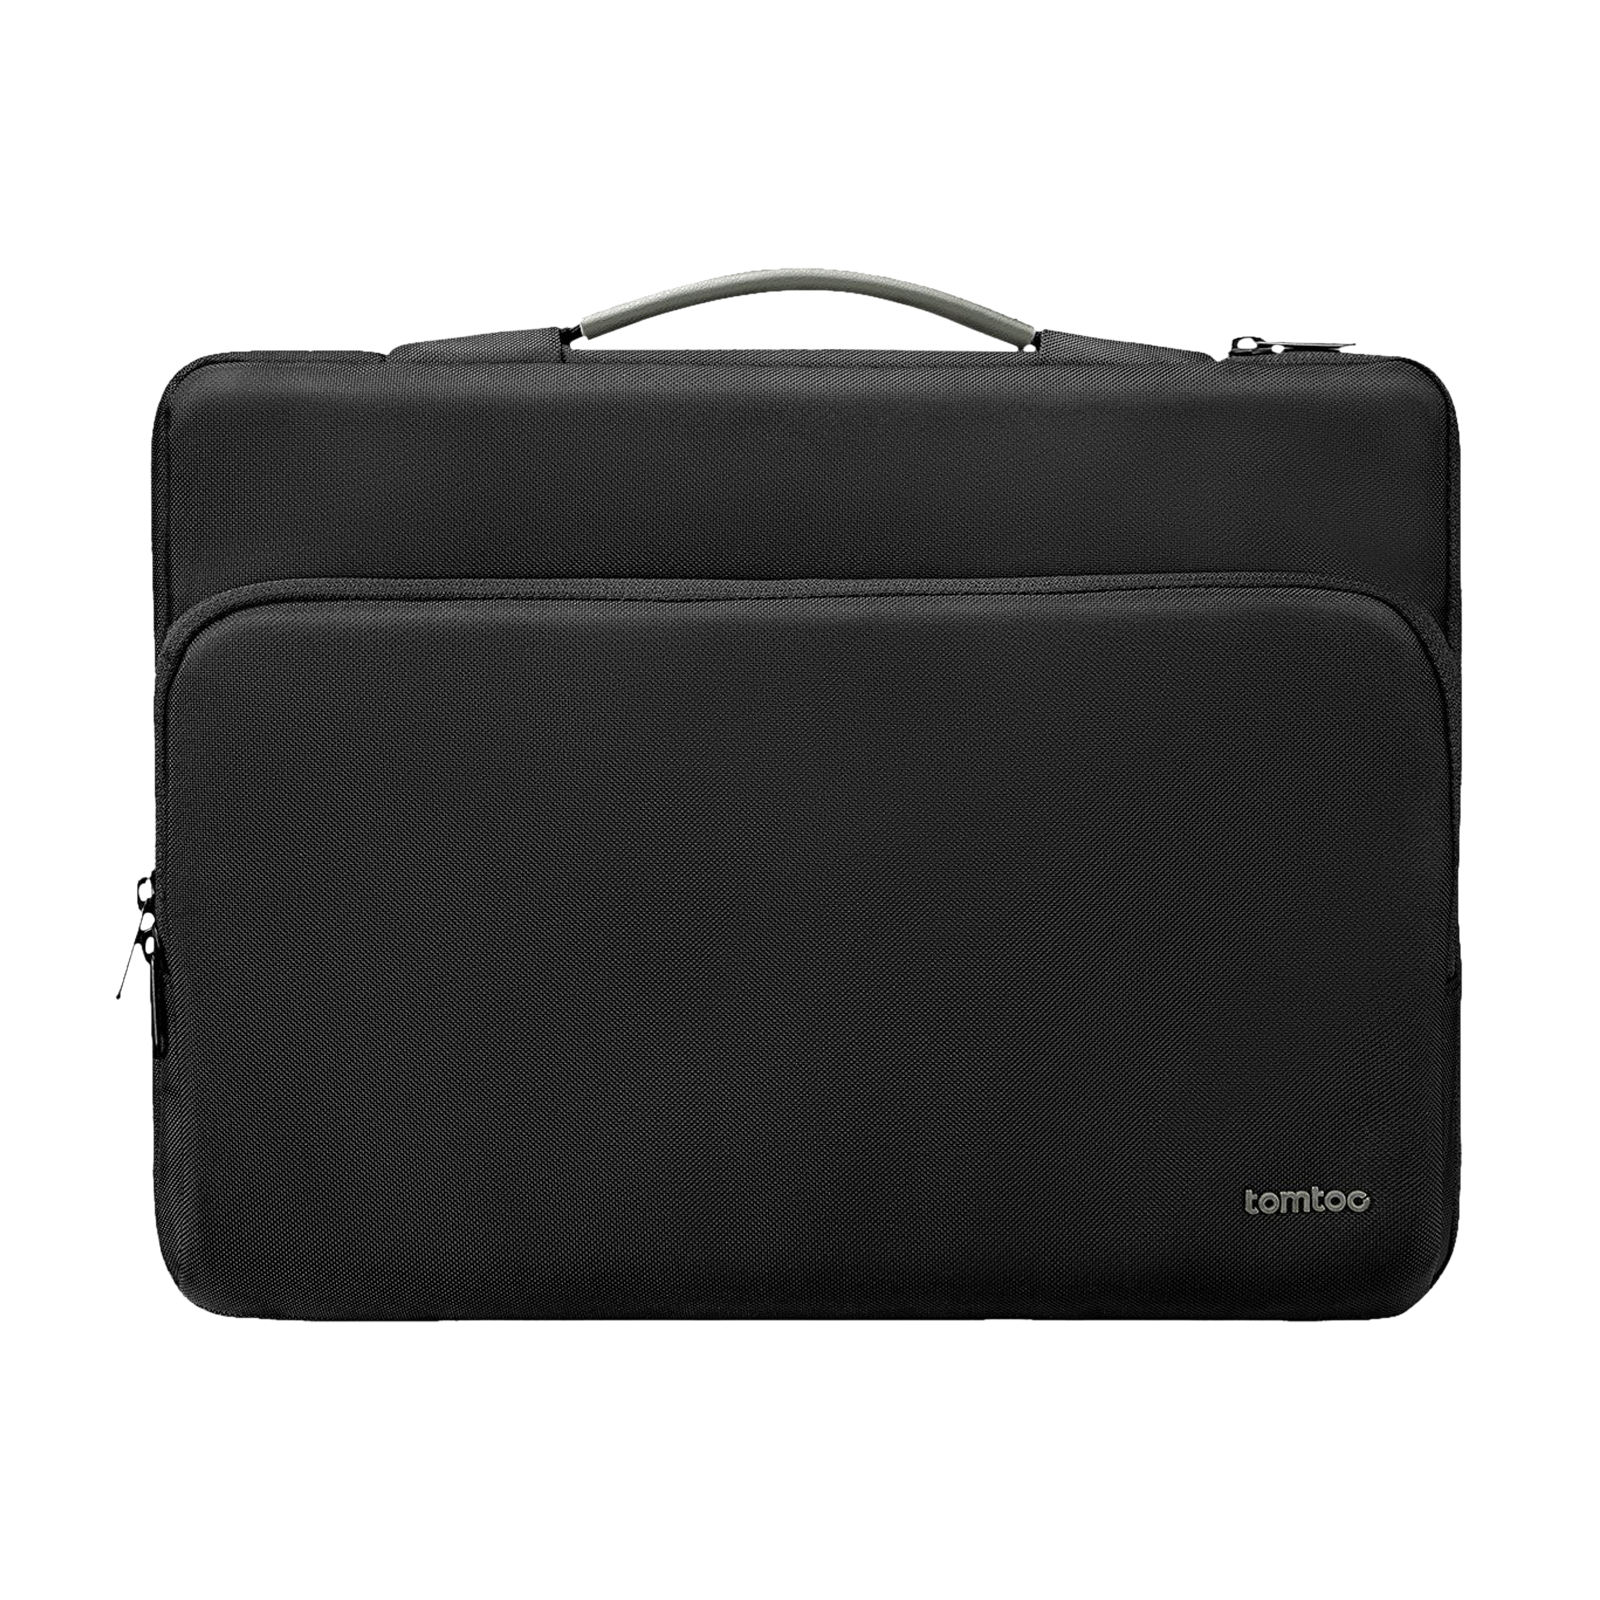 tomtoc Defender Recycled Fabrics Laptop Sleeve for 16 Inch Laptop (360 Superior Protection, Black)